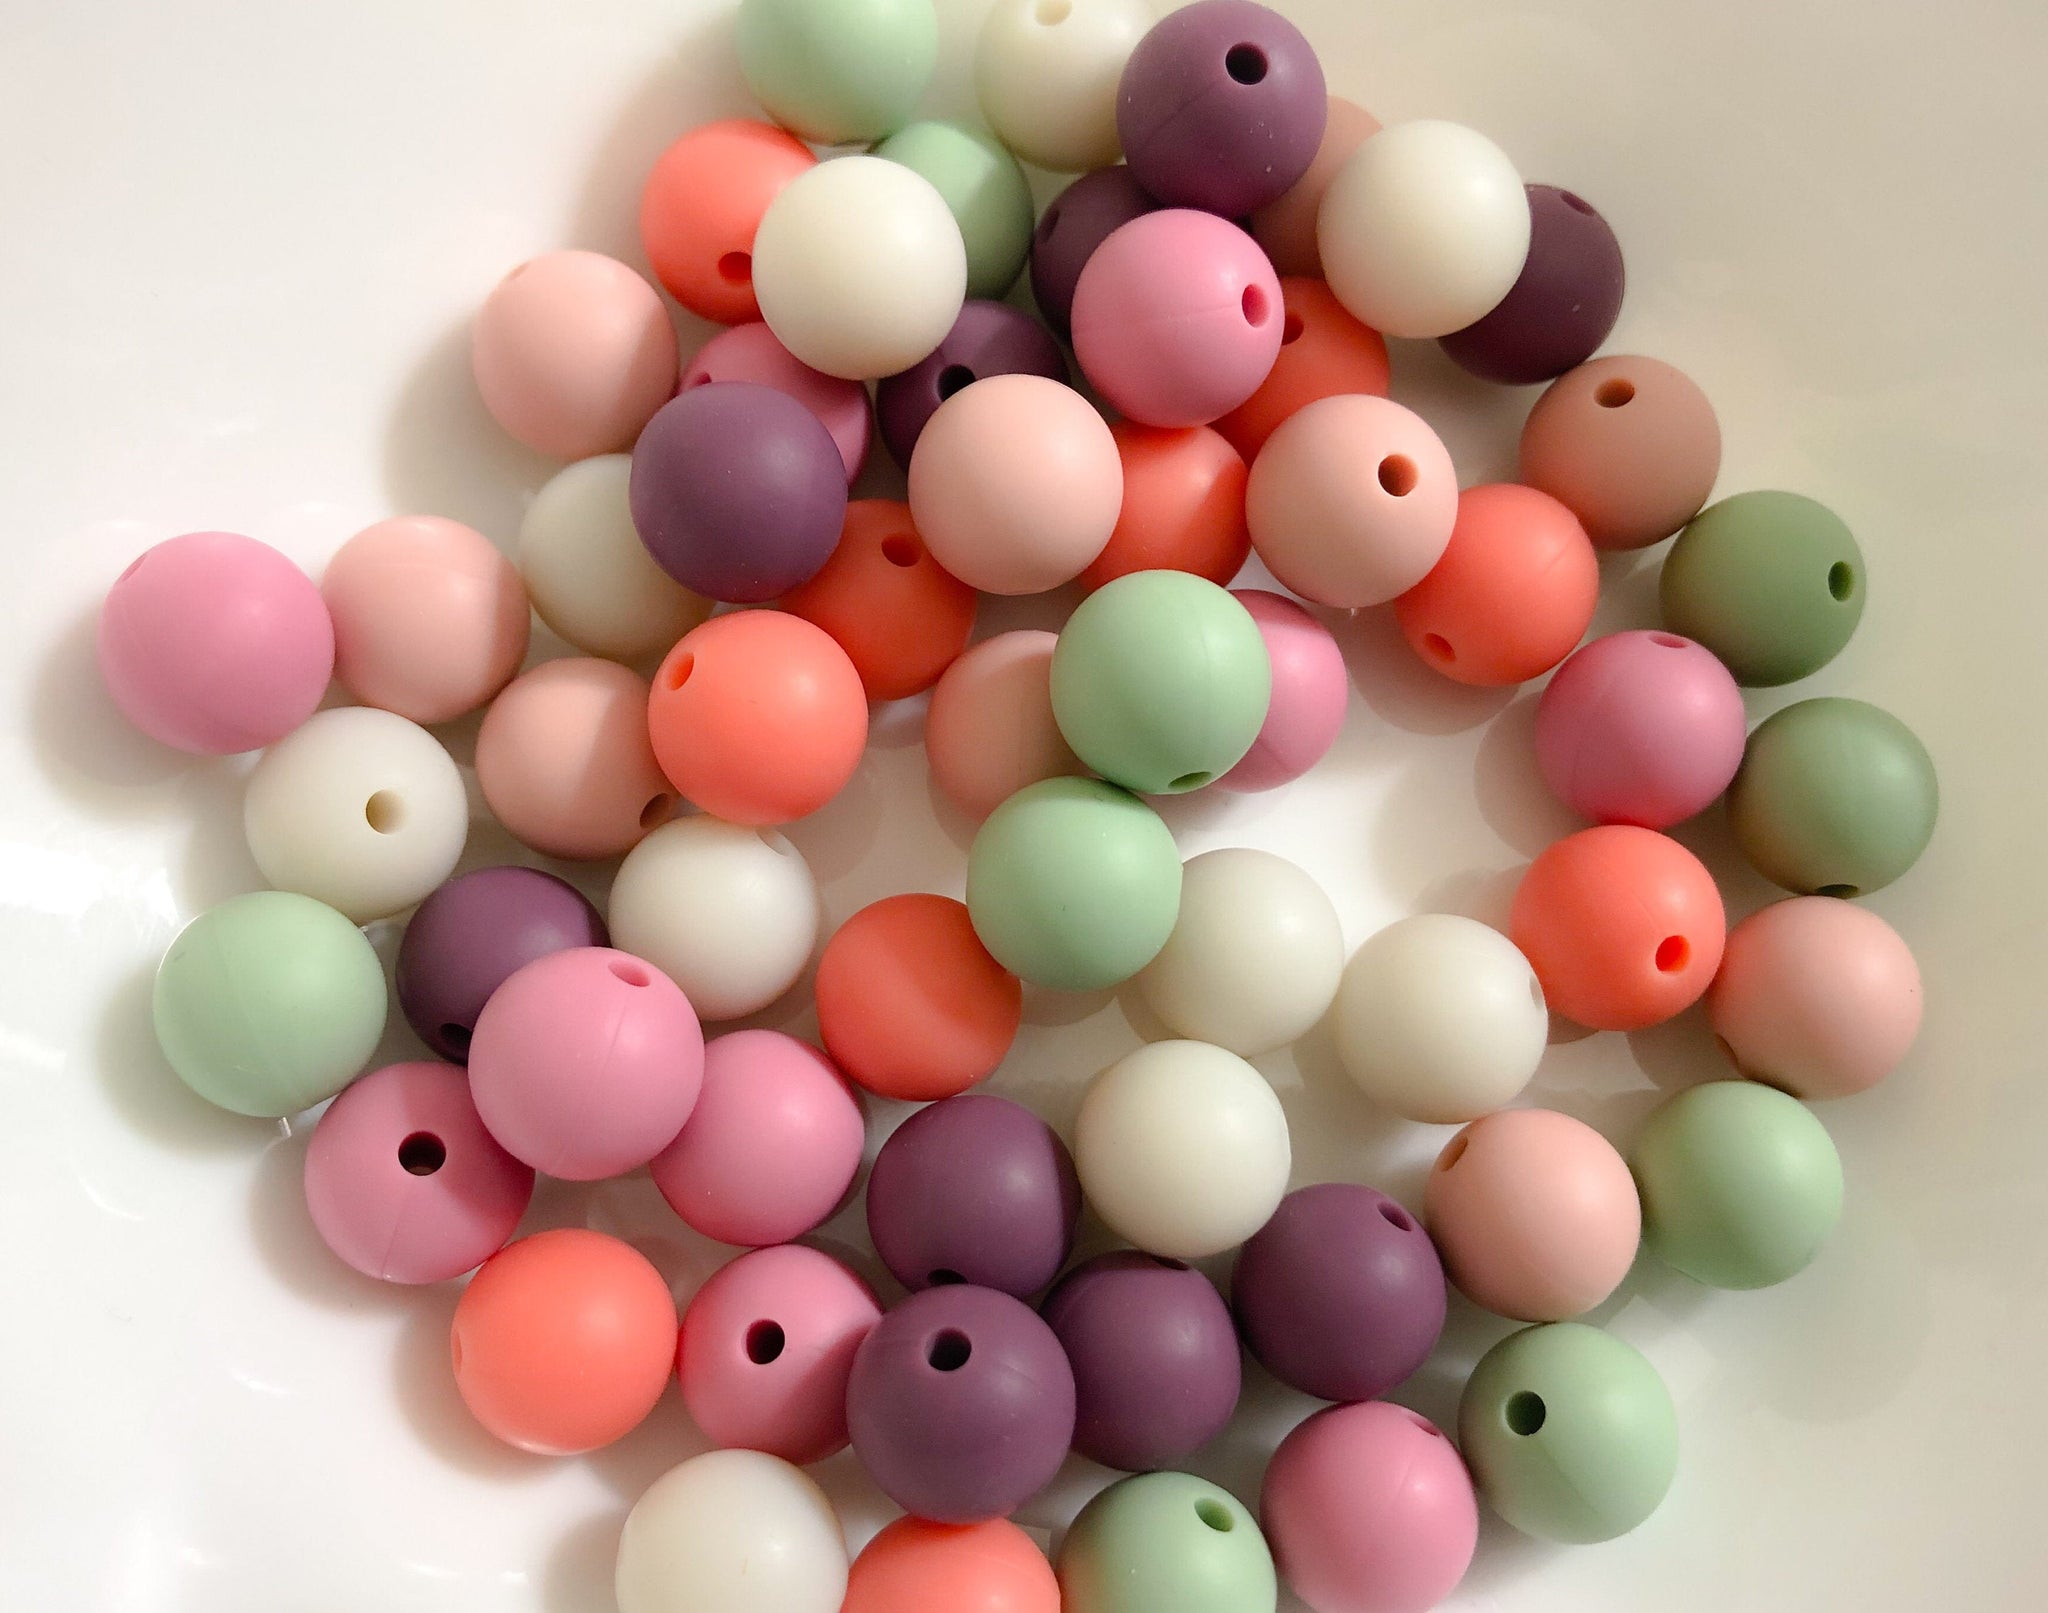 50 or 100 BULK Round Silicone Beads, Pink, Flamingo, Green, Turquoise &  Lavender Purple Silicone Bead Mix, Silicone Beads, Wholesale Beads 